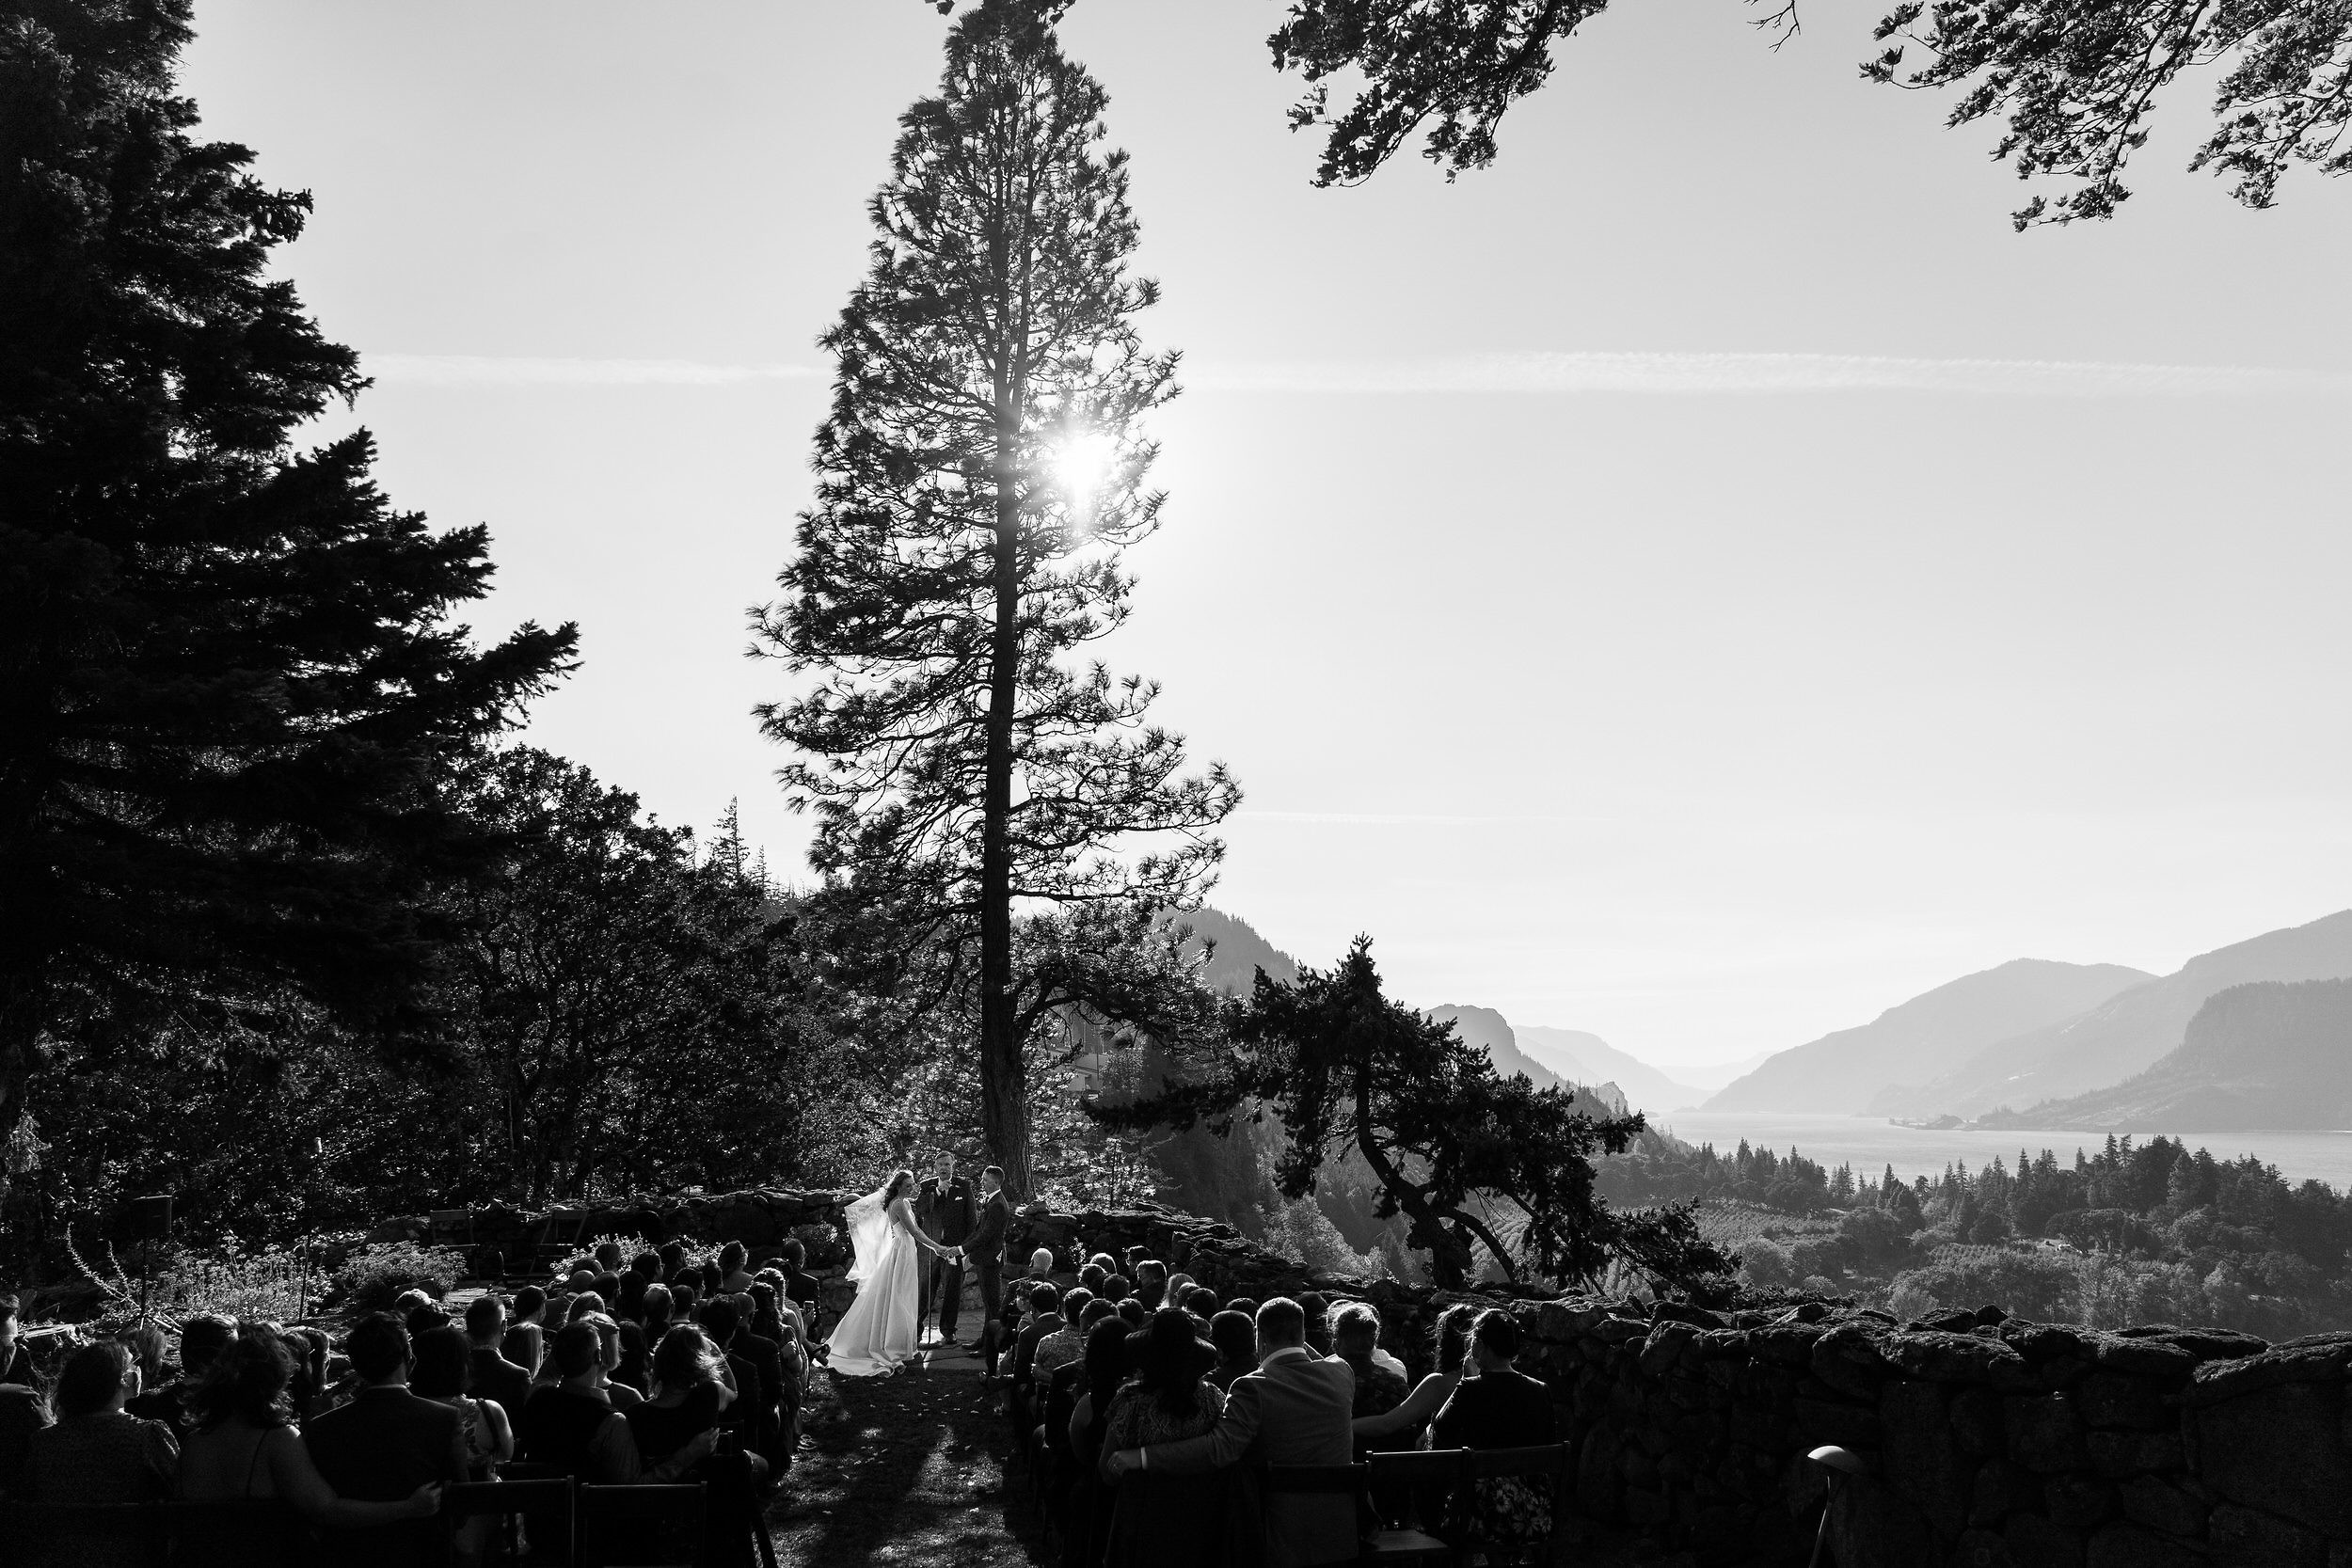 A ceremony moment during a wedding in Hood River, Oregon.